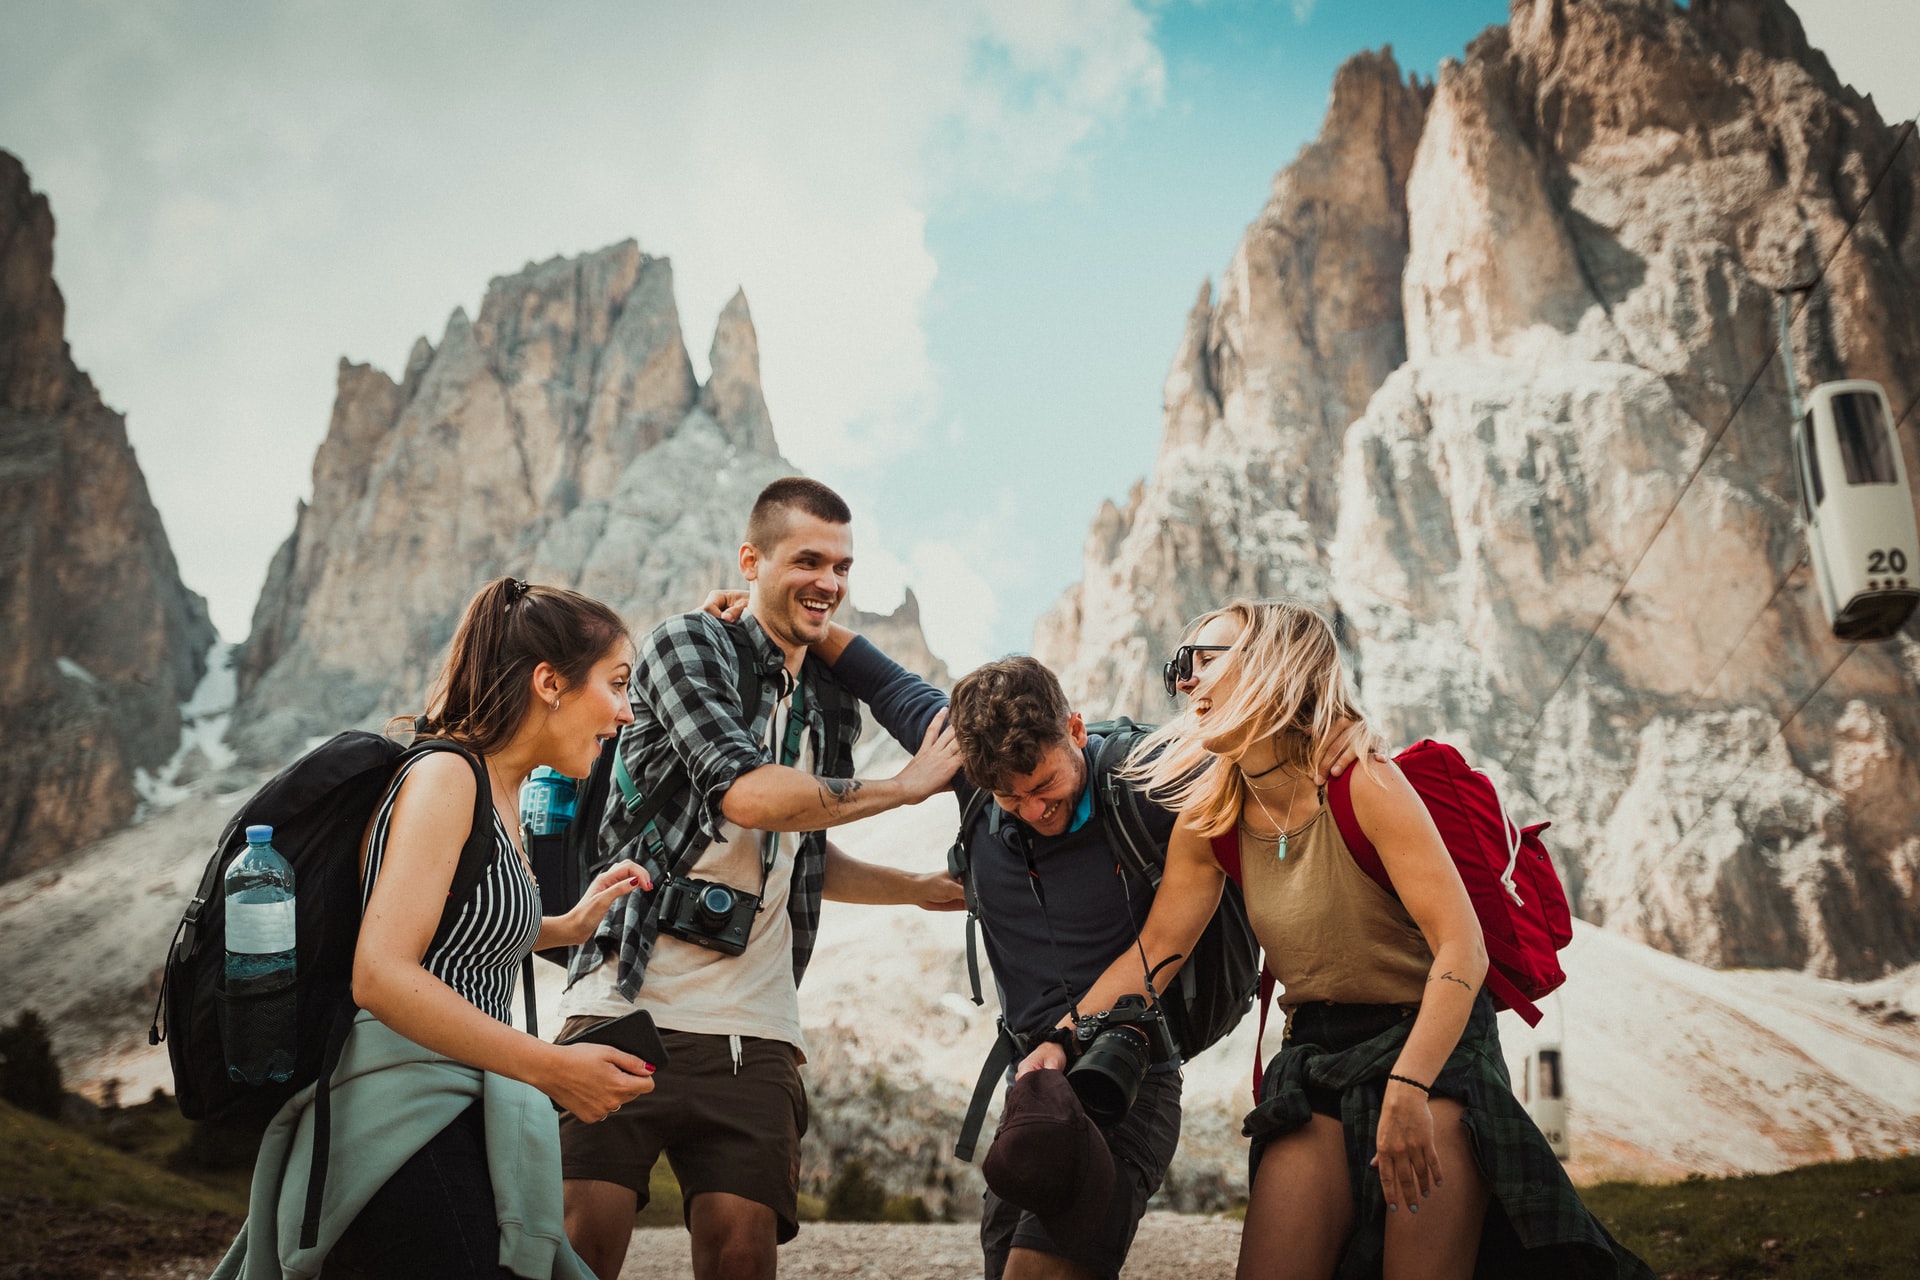 A group of photographers laughing with each other against a mountainous backdrop